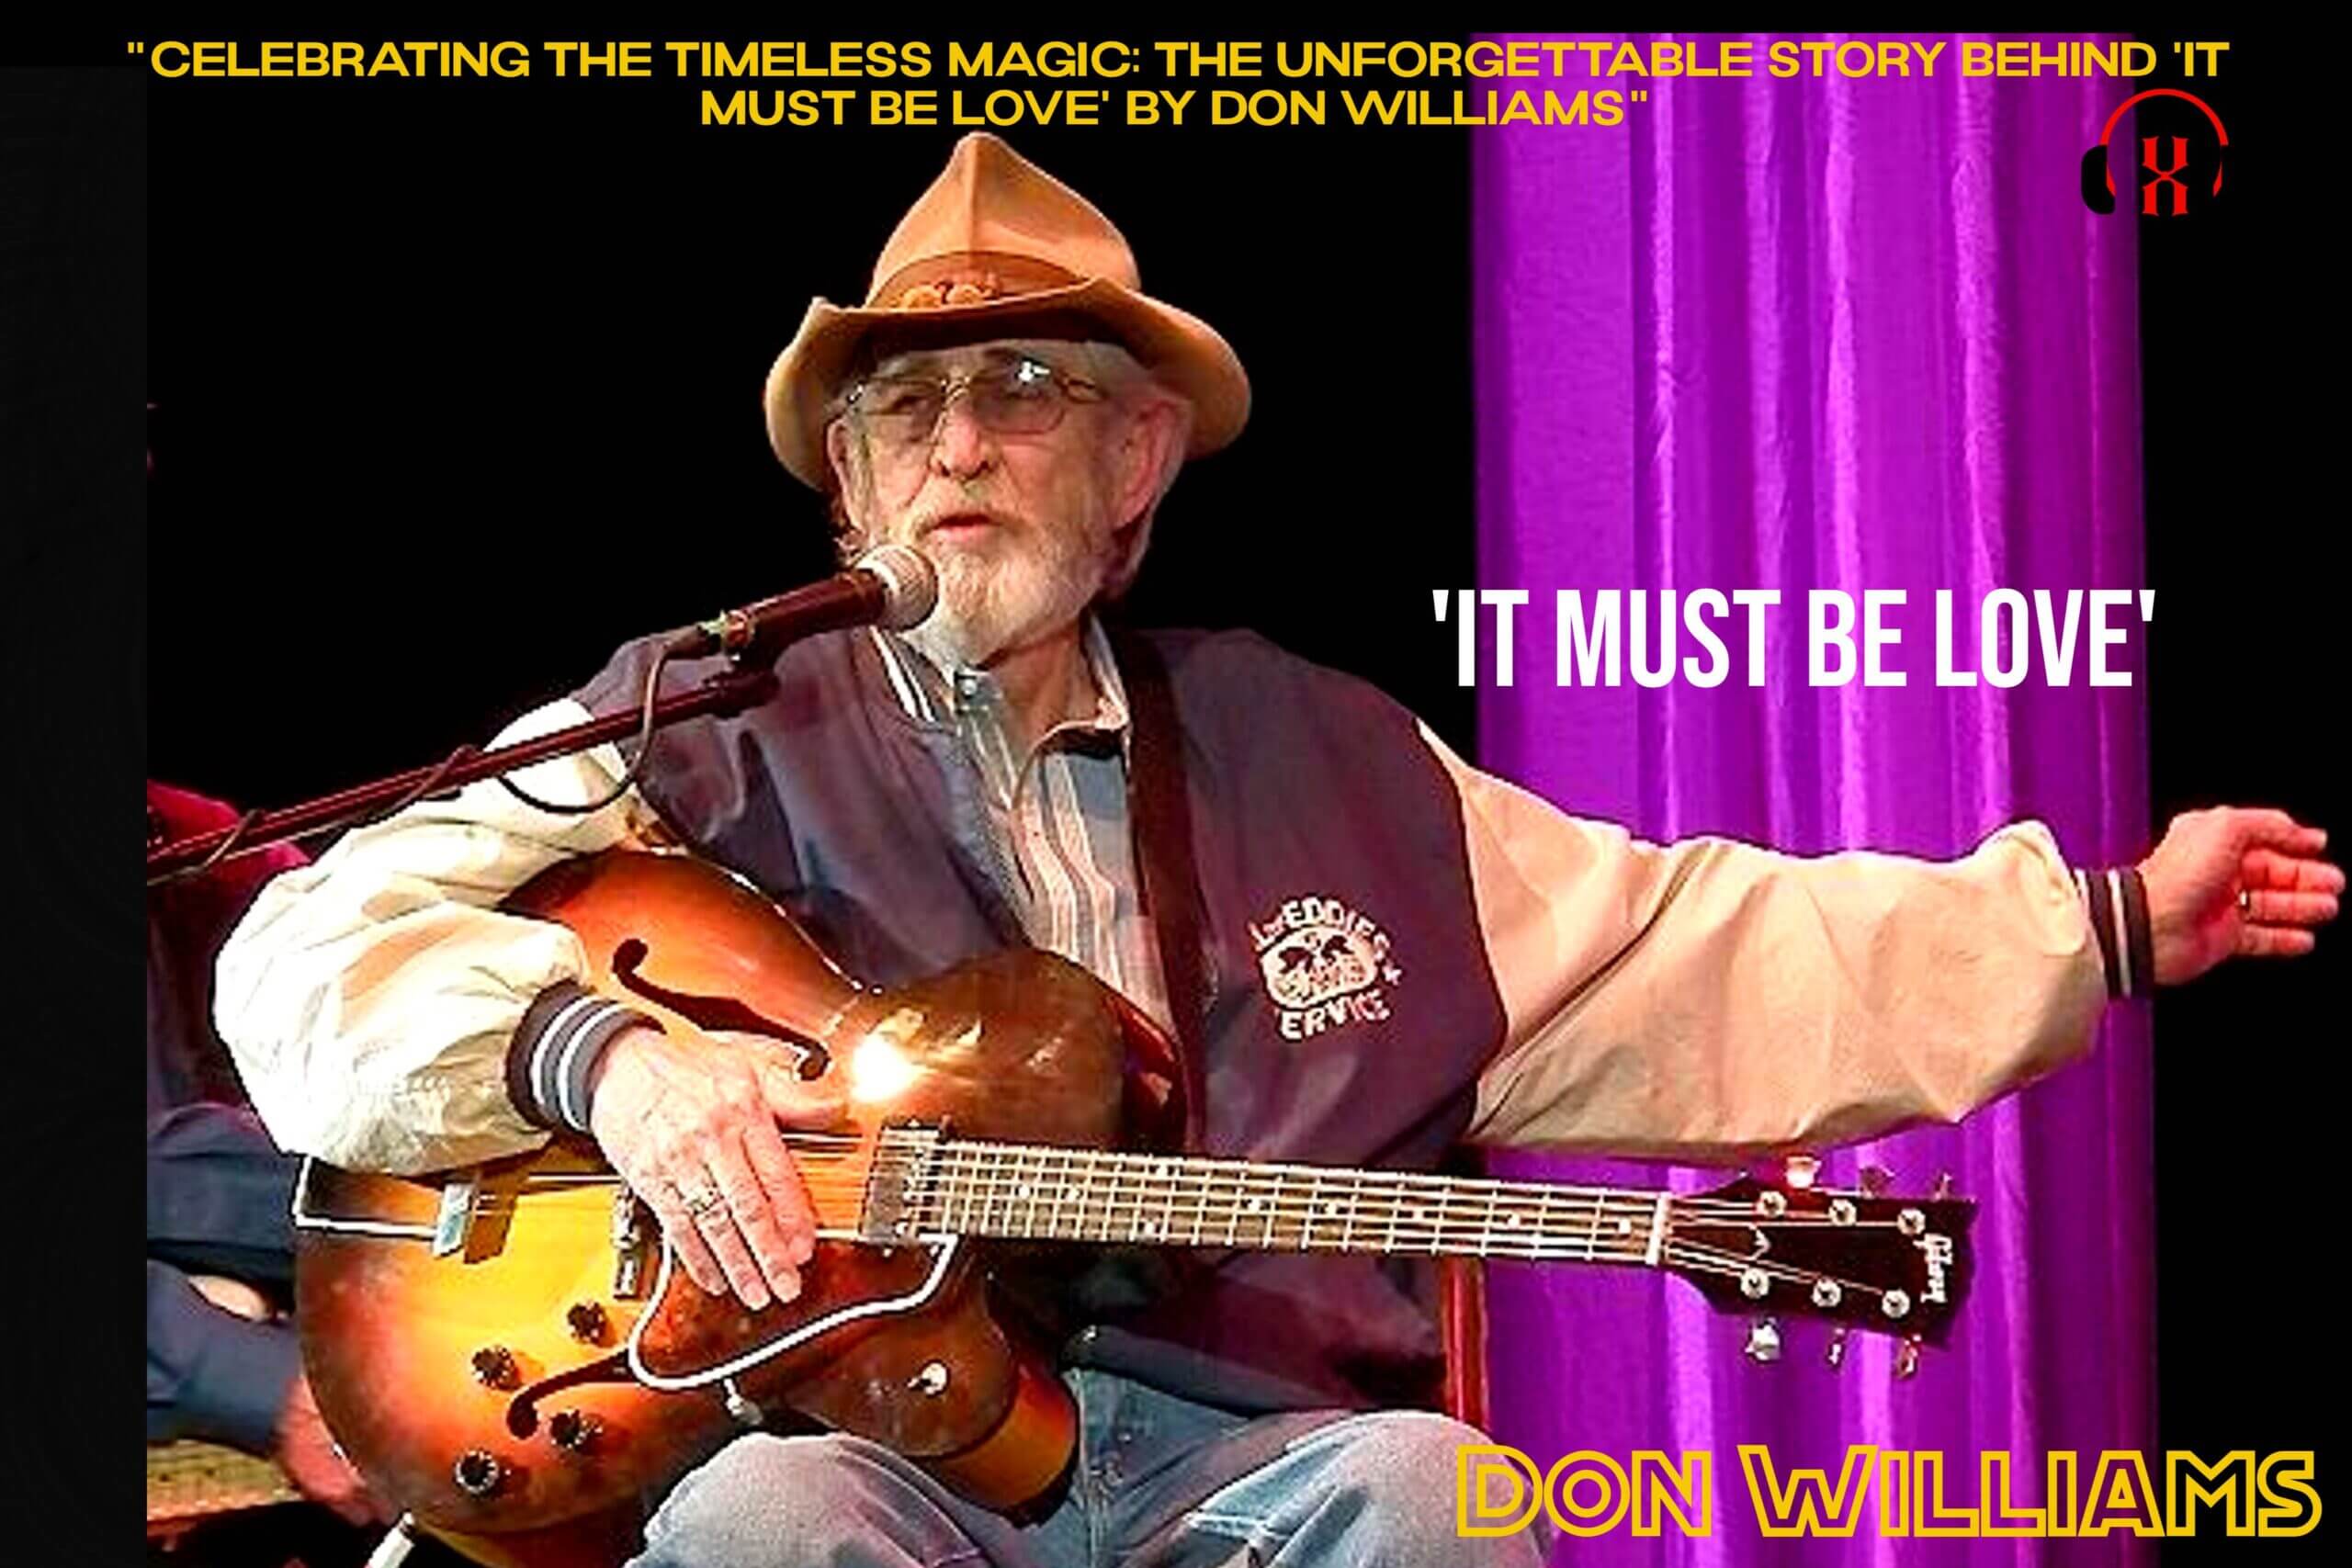 “Celebrating the Timeless Magic: The Unforgettable Story Behind ‘It Must Be Love’ by Don Williams”